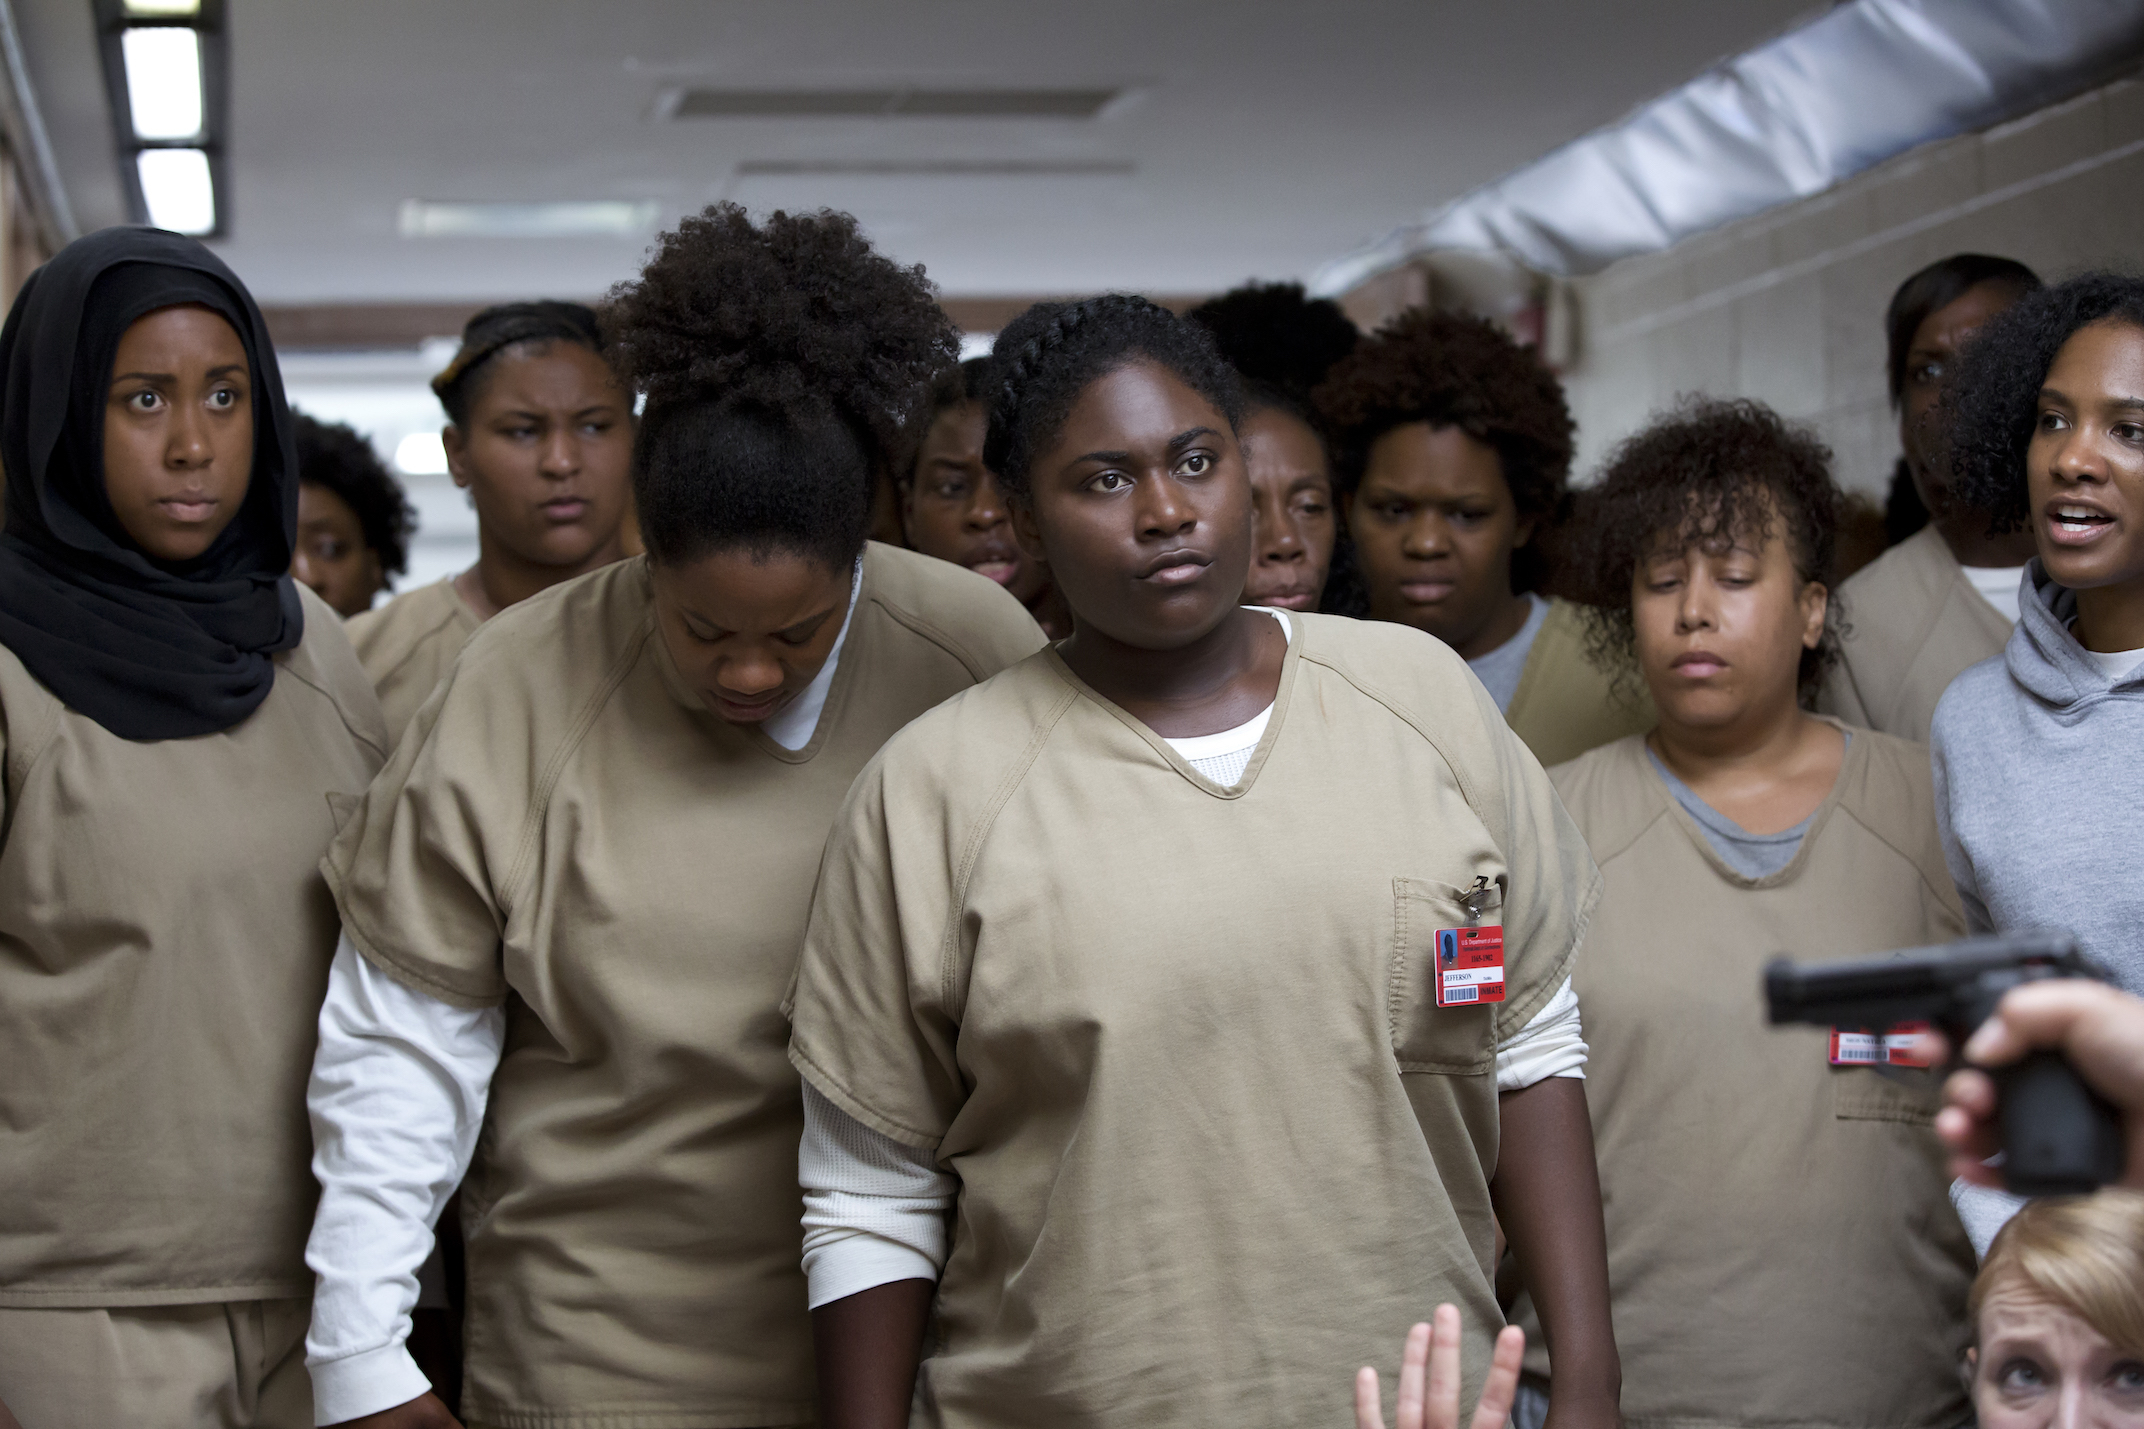 OITNB's Used-Panty Business Is Real: The Shocking True Story